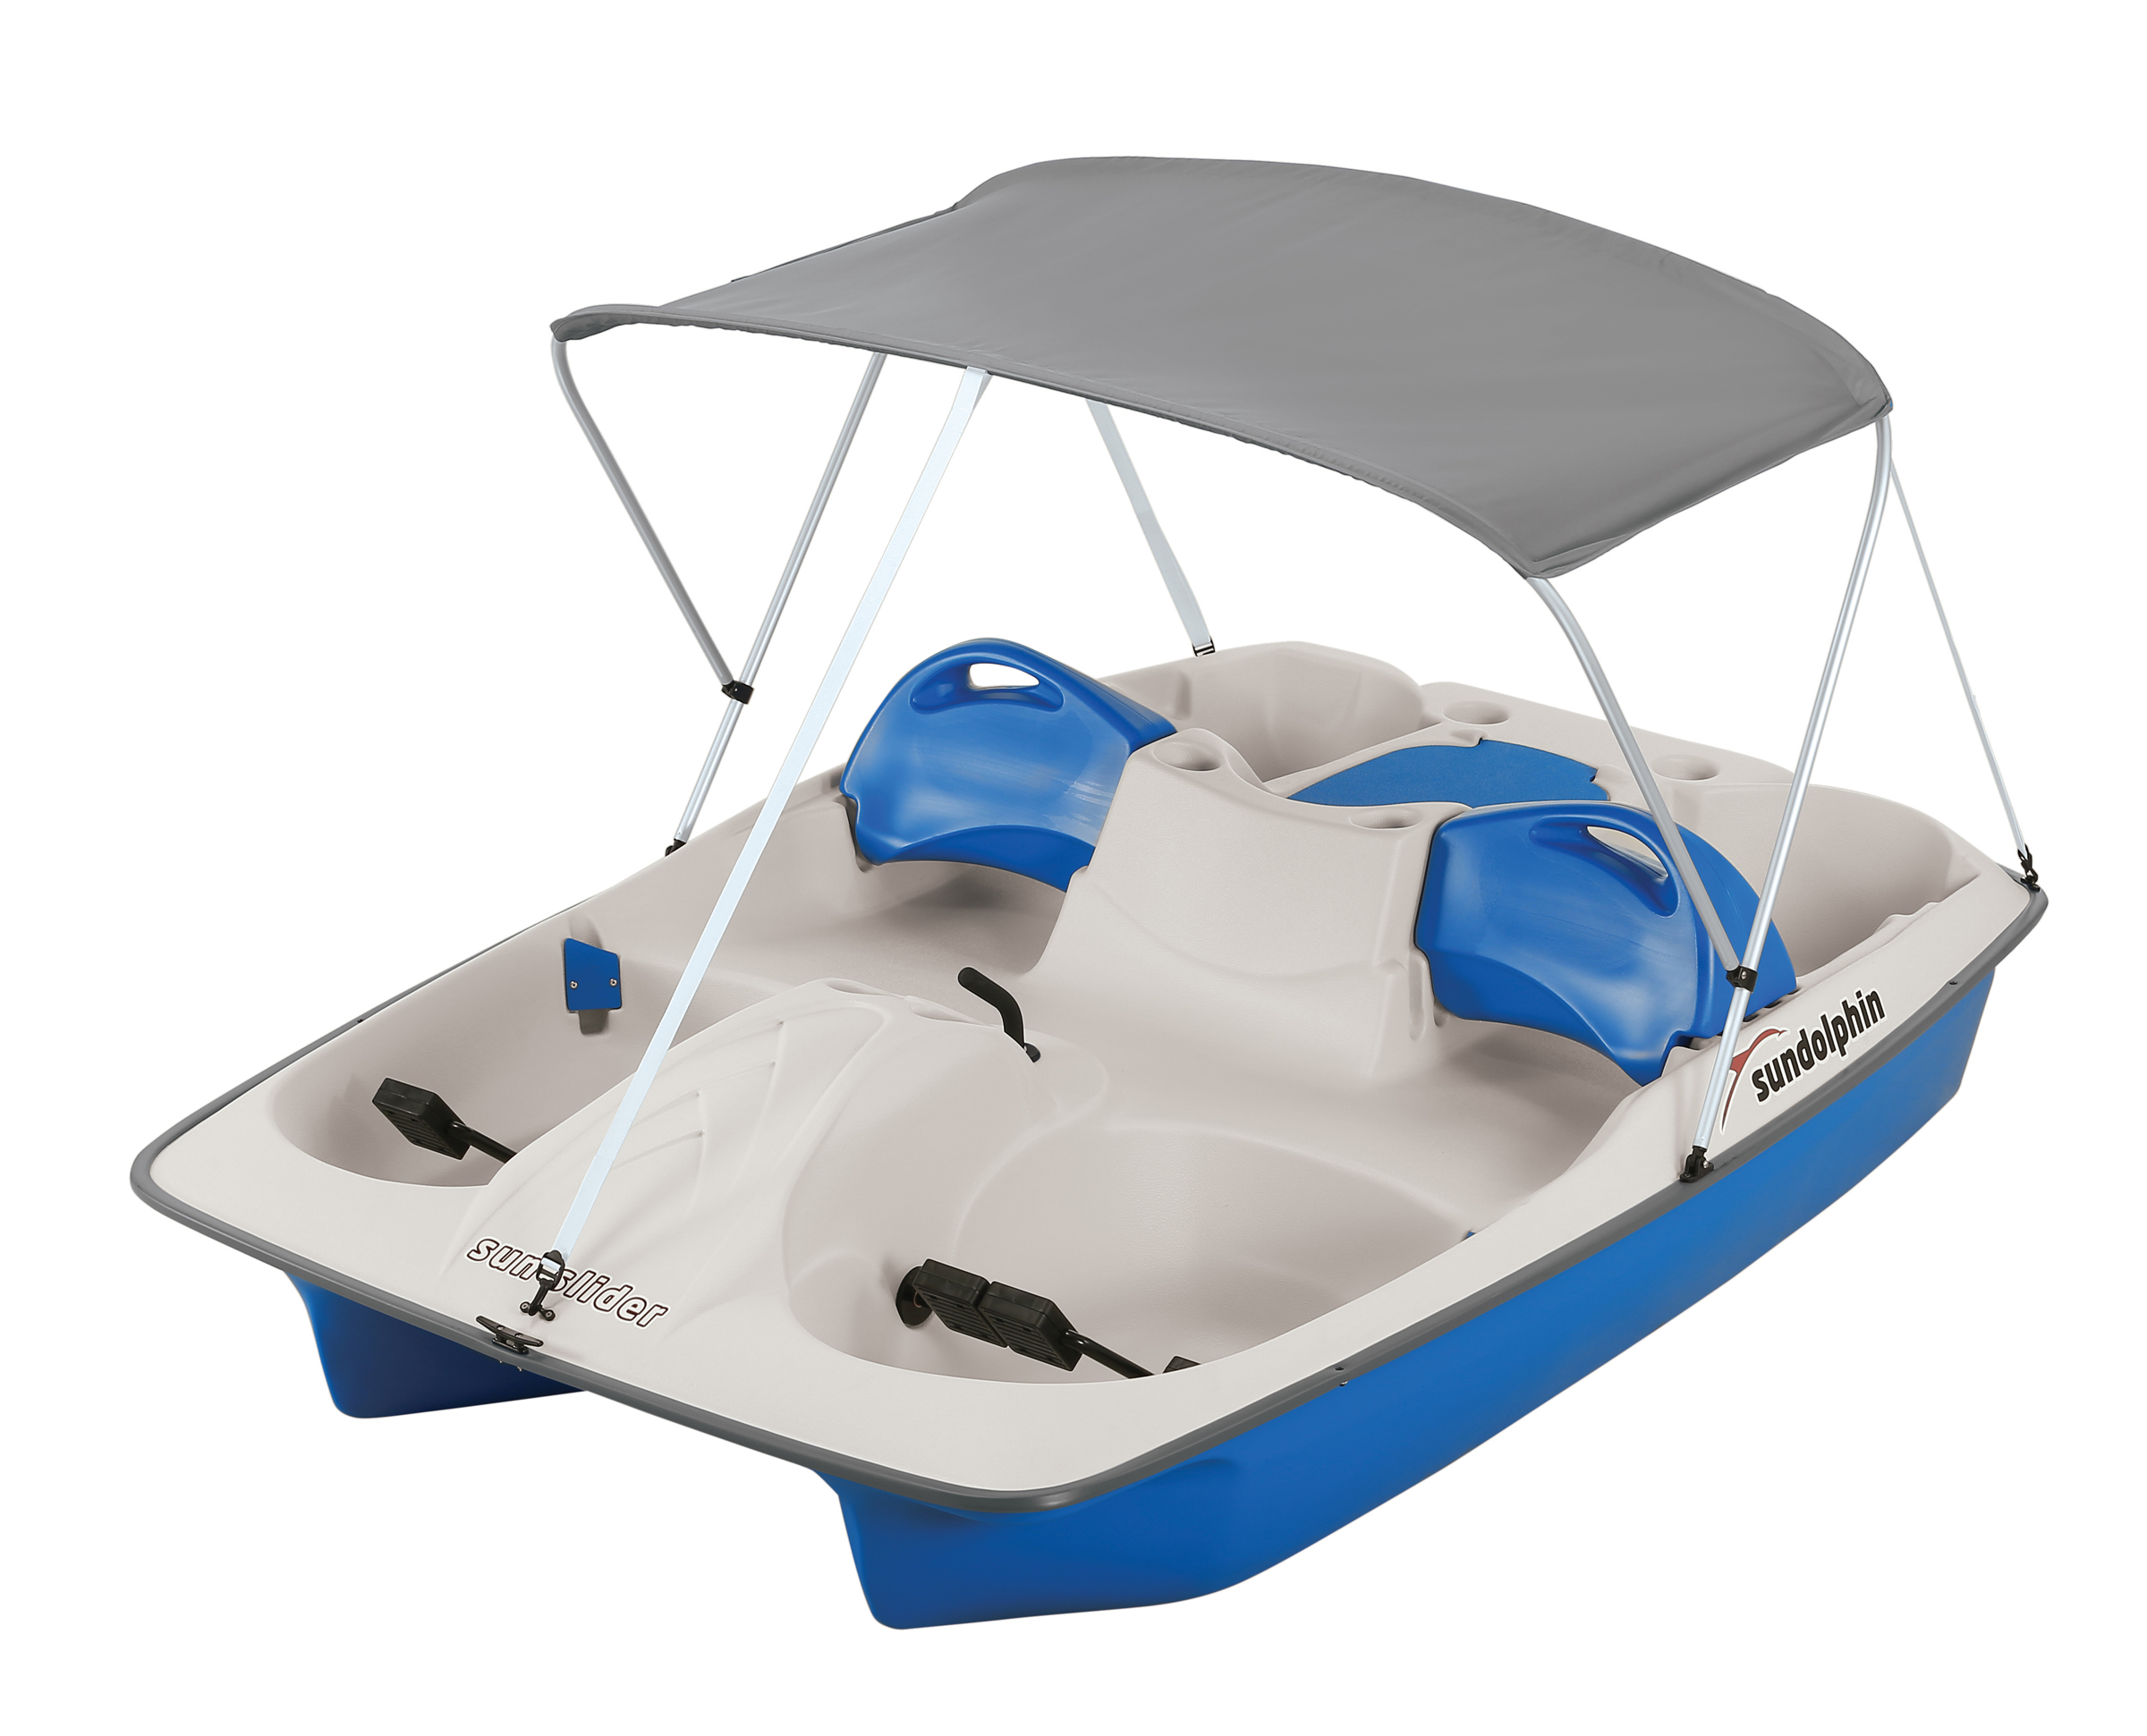 Sun Dolphin 5 Seat Sun Slider Pedal Boat with Canopy, Blue - image 1 of 6